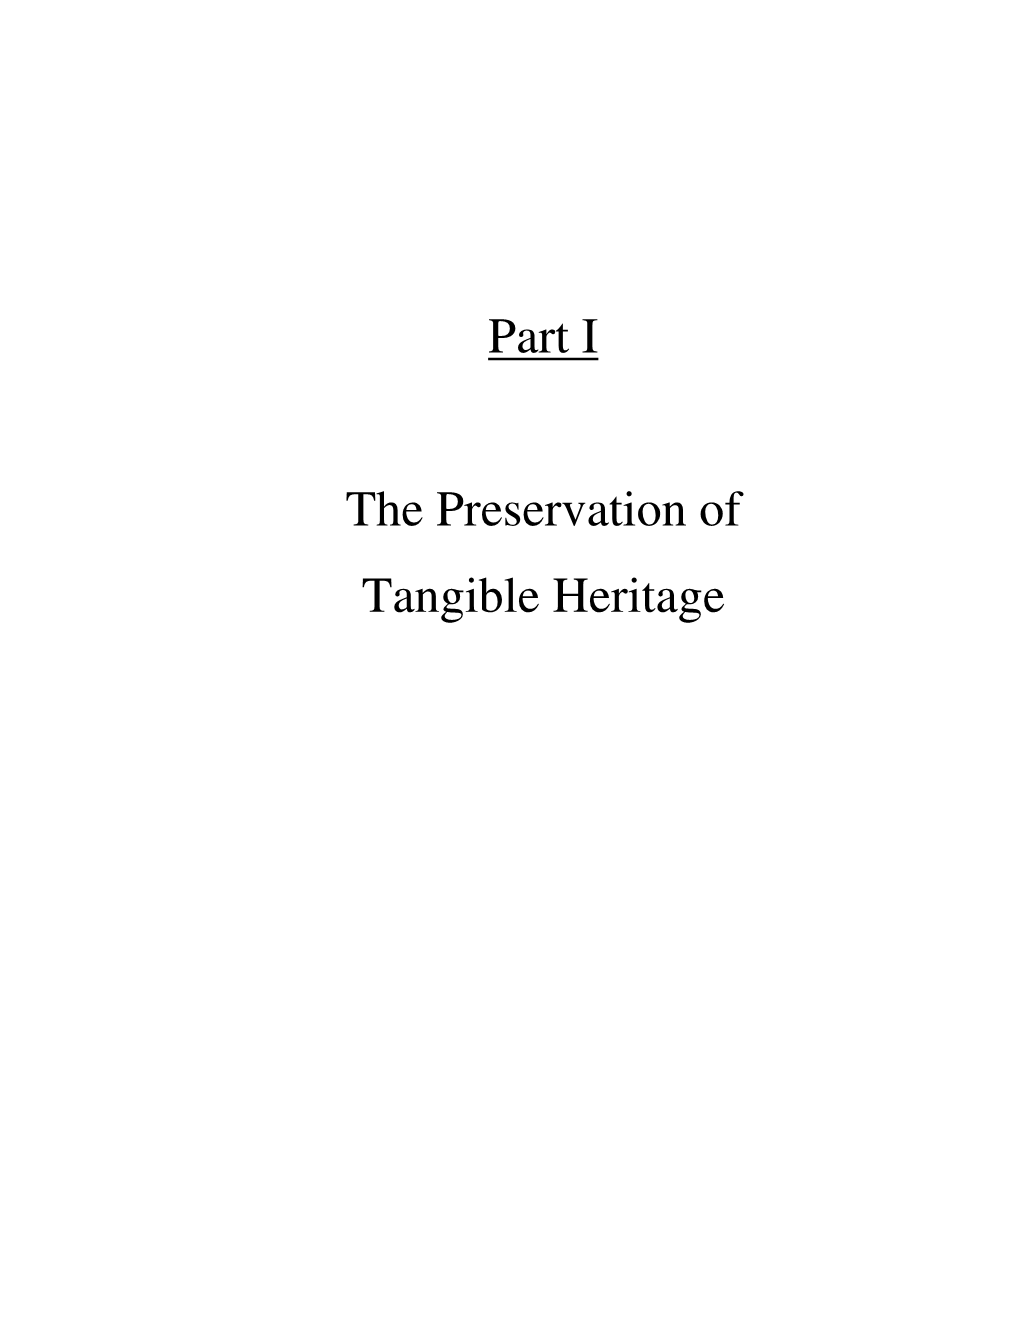 Part I the Preservation of Tangible Heritage